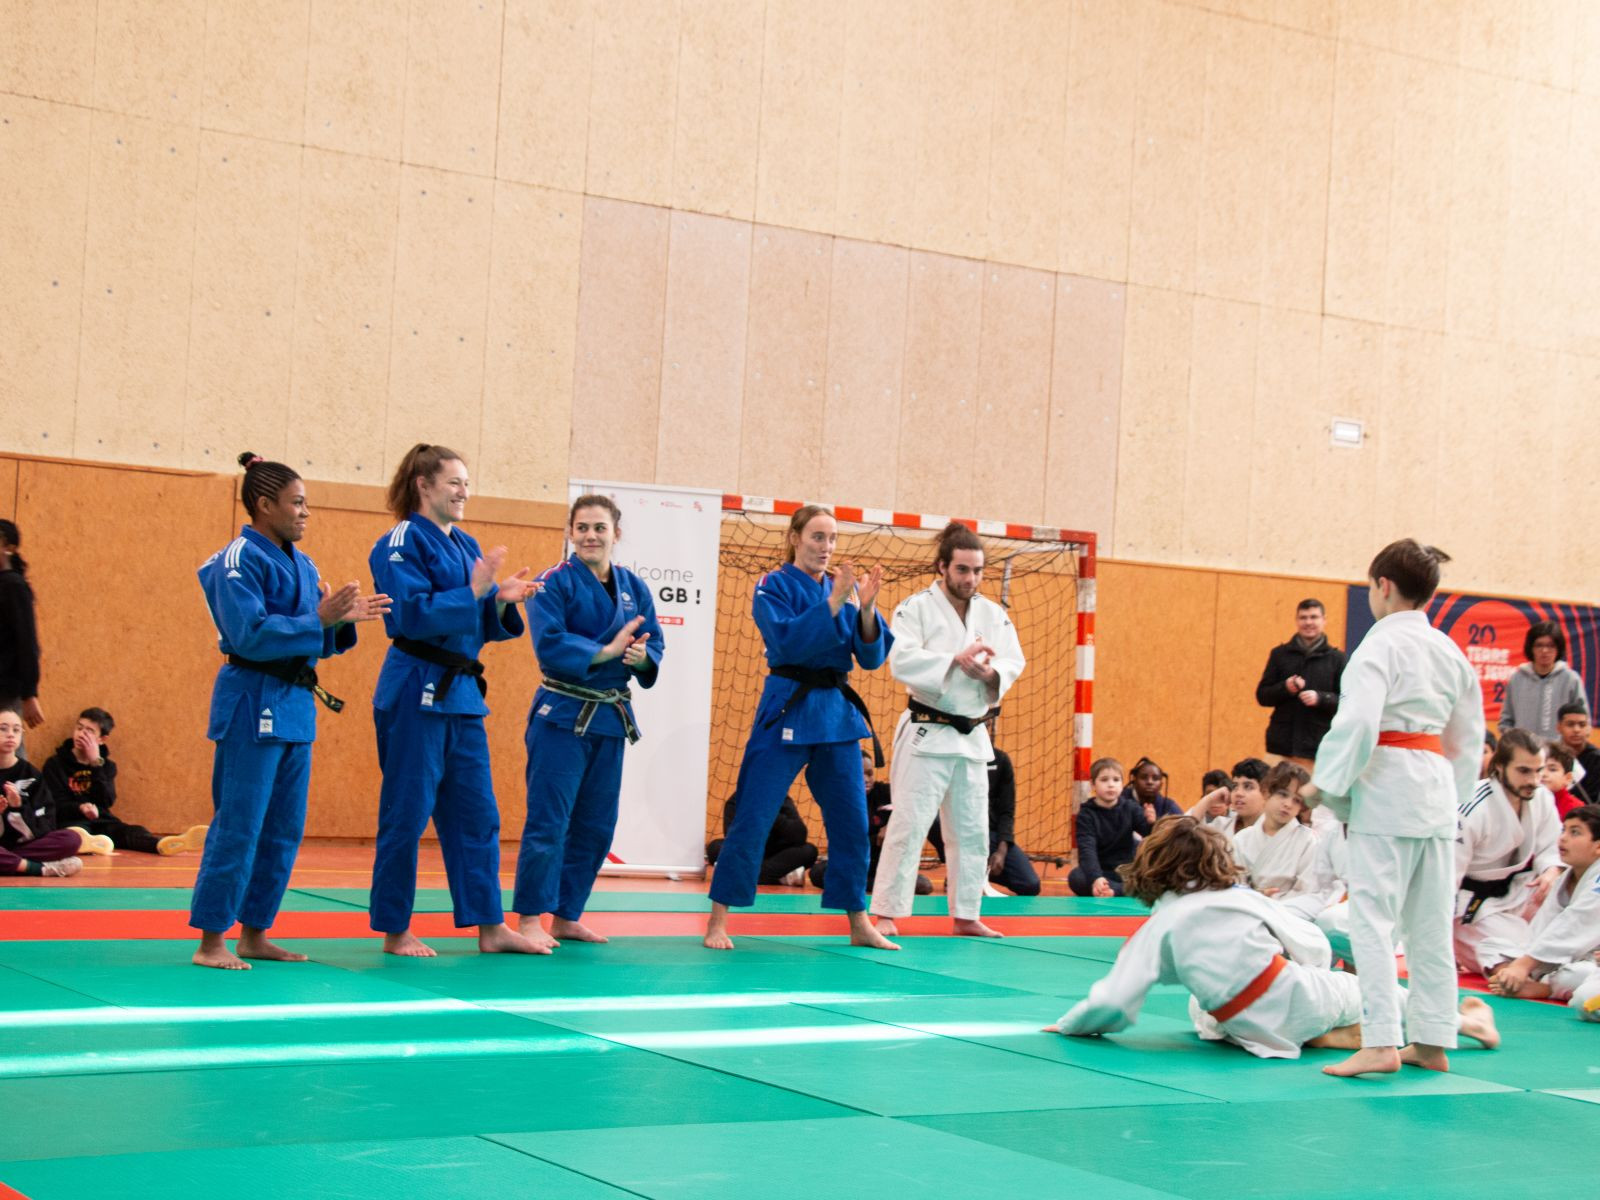 Britain's judo team have visited Clichy where they are due to be based before next year's Olympic Games in Paris ©Team GB